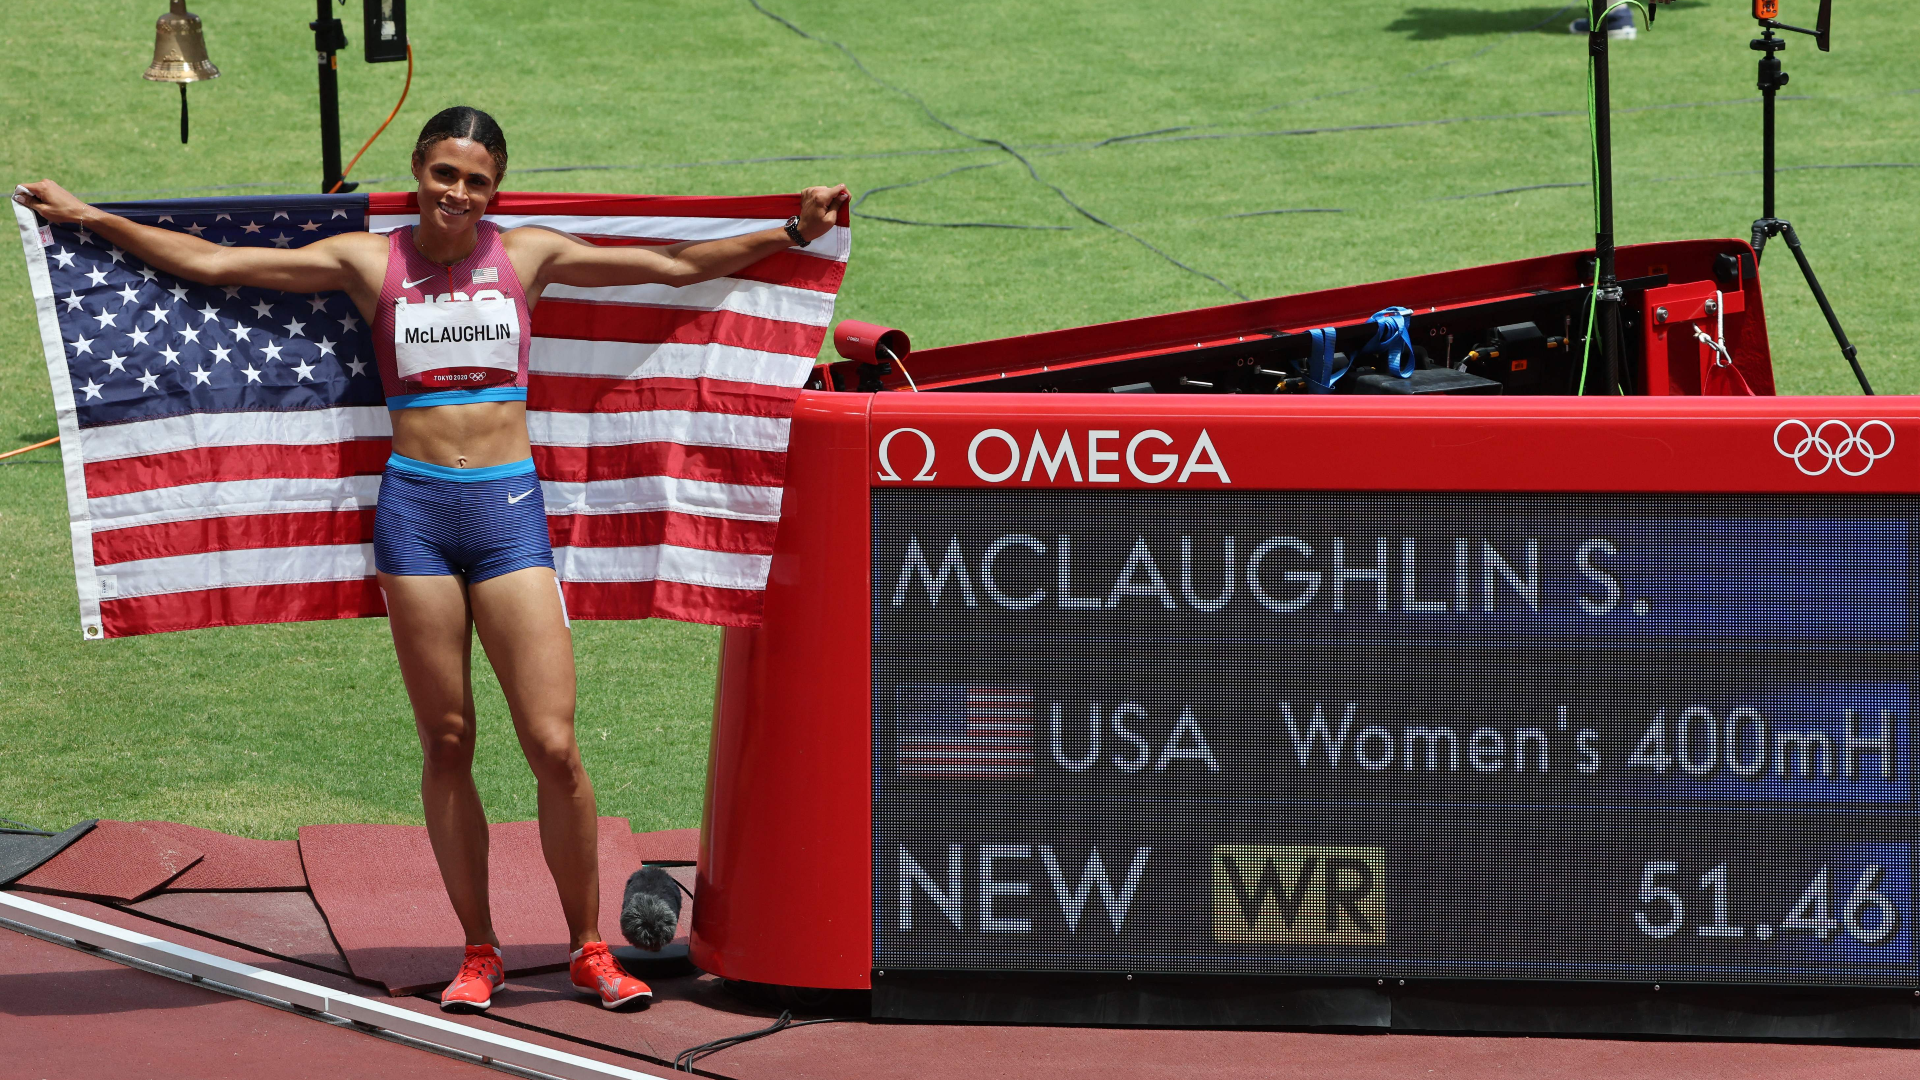 Tokyo Olympics: McLaughlin Smashes Own World Record To Win Women's 400m Hurdles